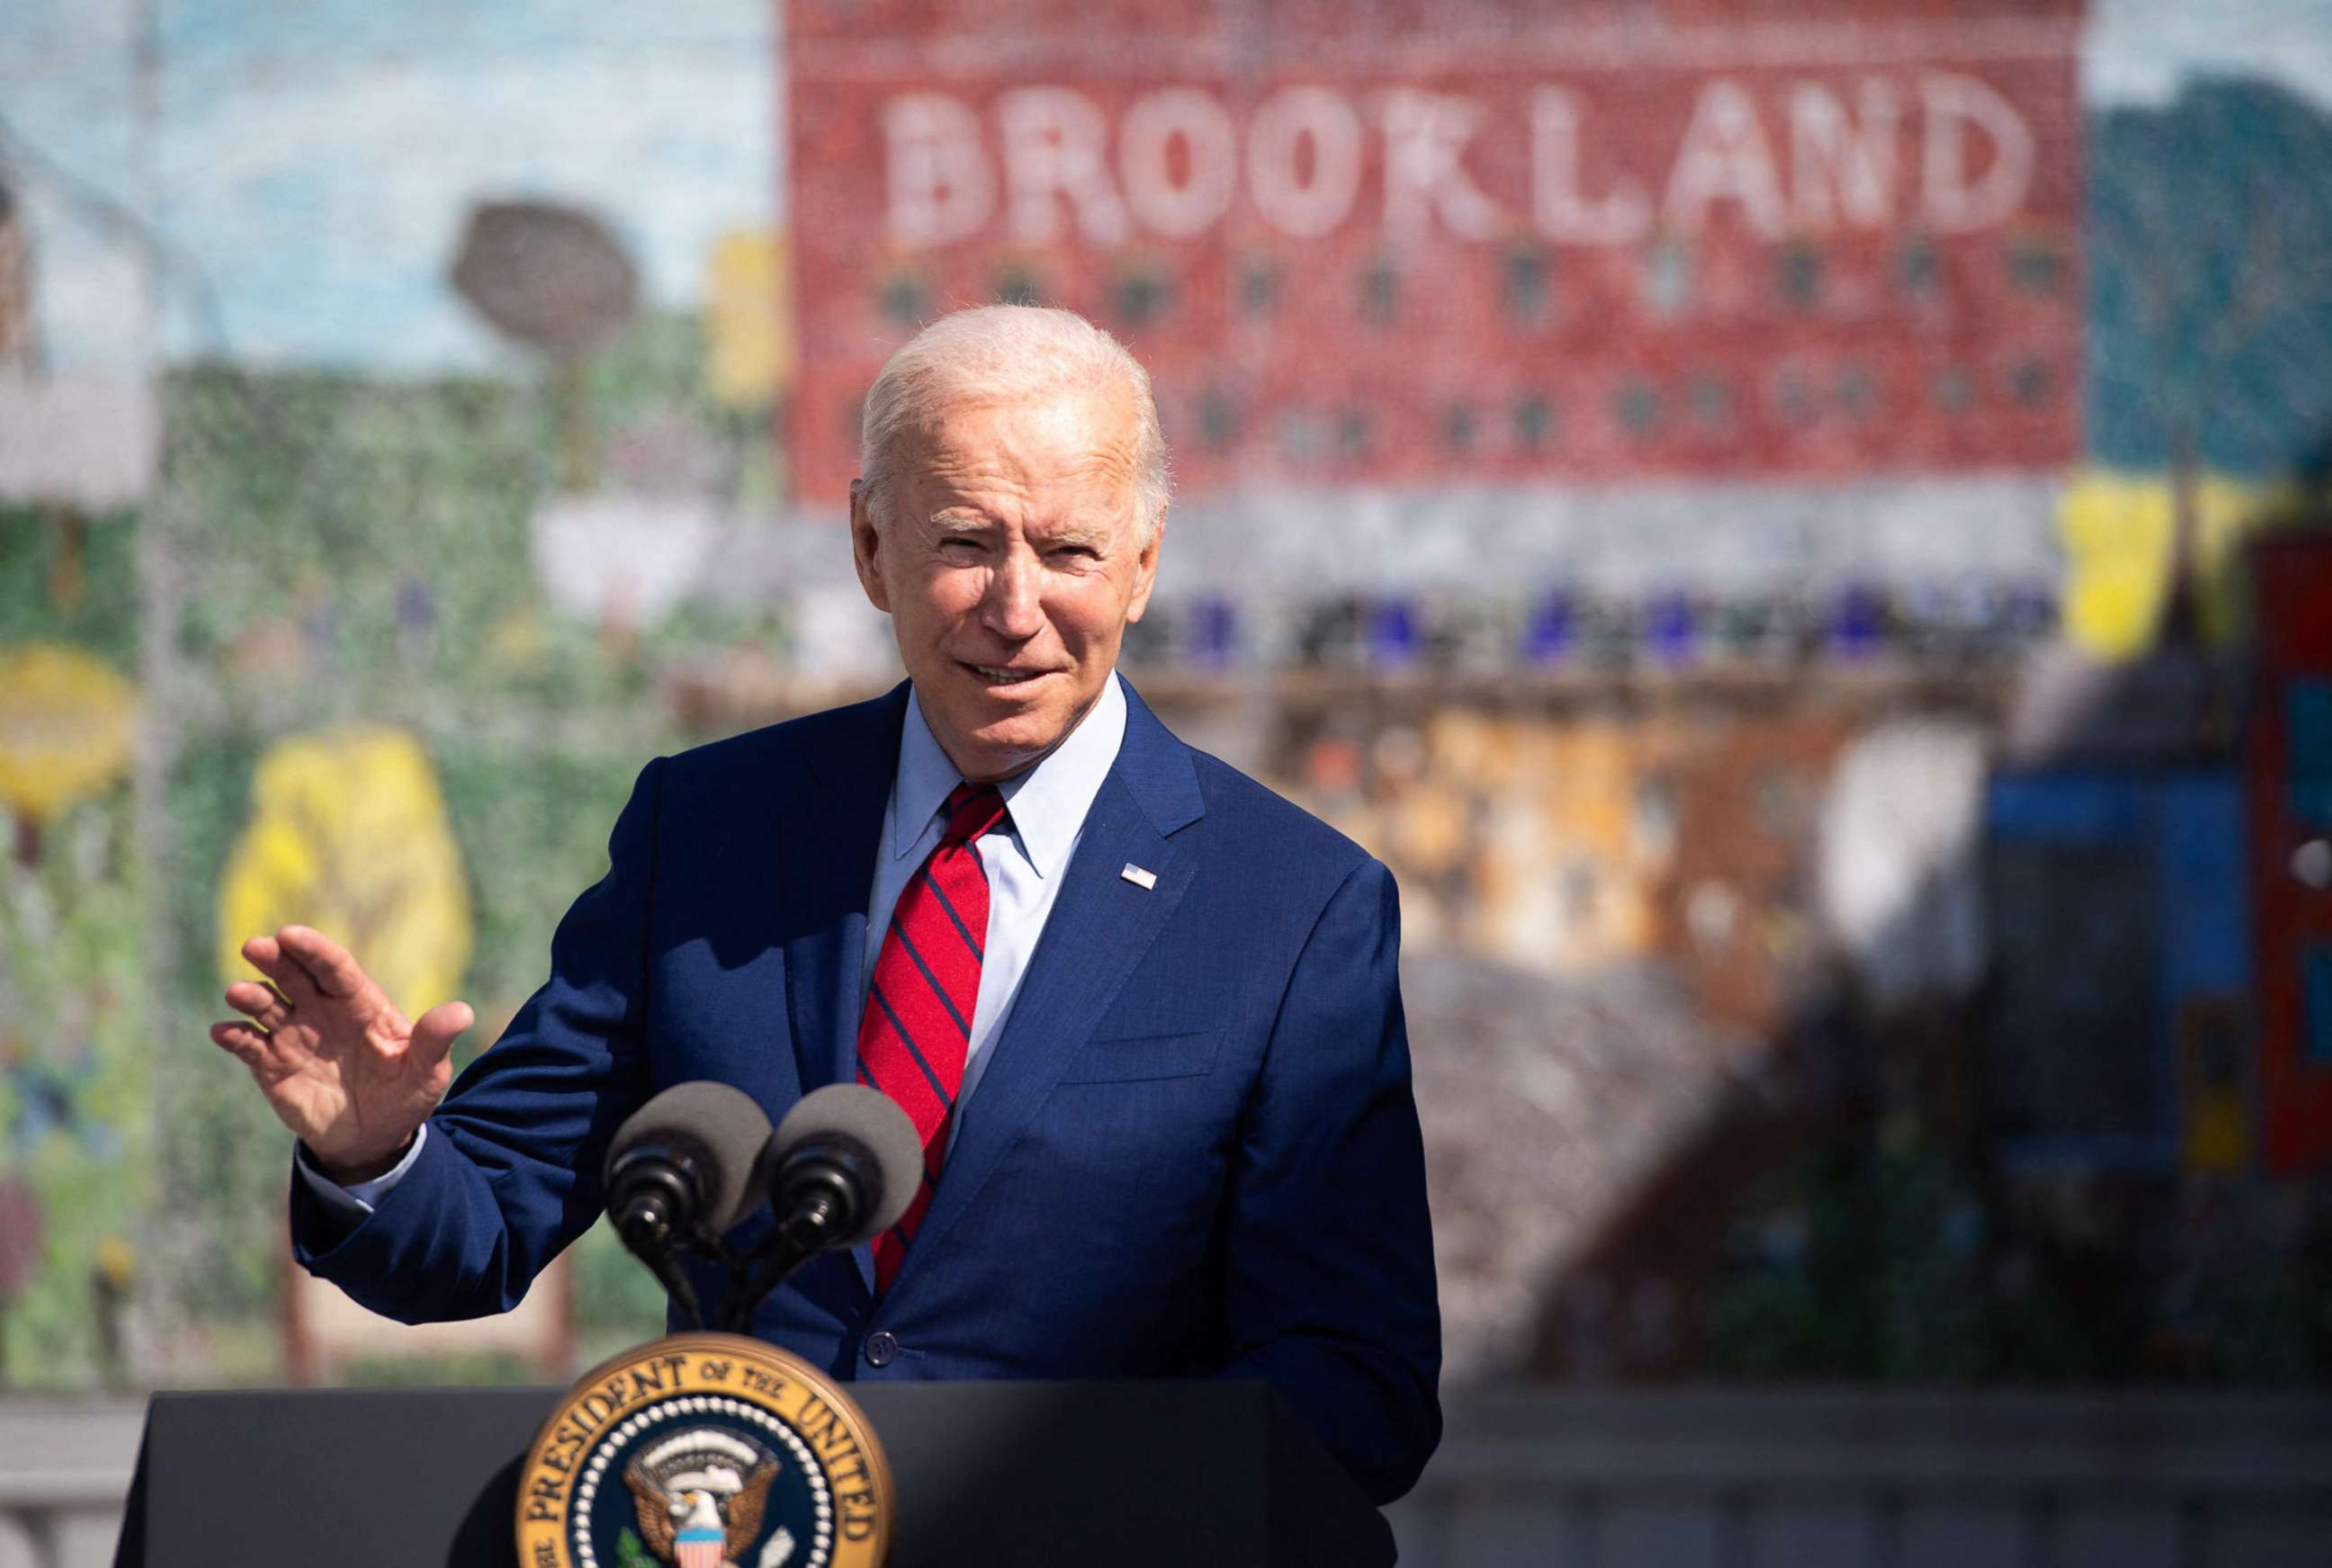 PHOTO: President Joe Biden speaks about coronavirus protections in schools during a visit to Brookland Middle School in Washington, D.C., Sept. 10, 2021.